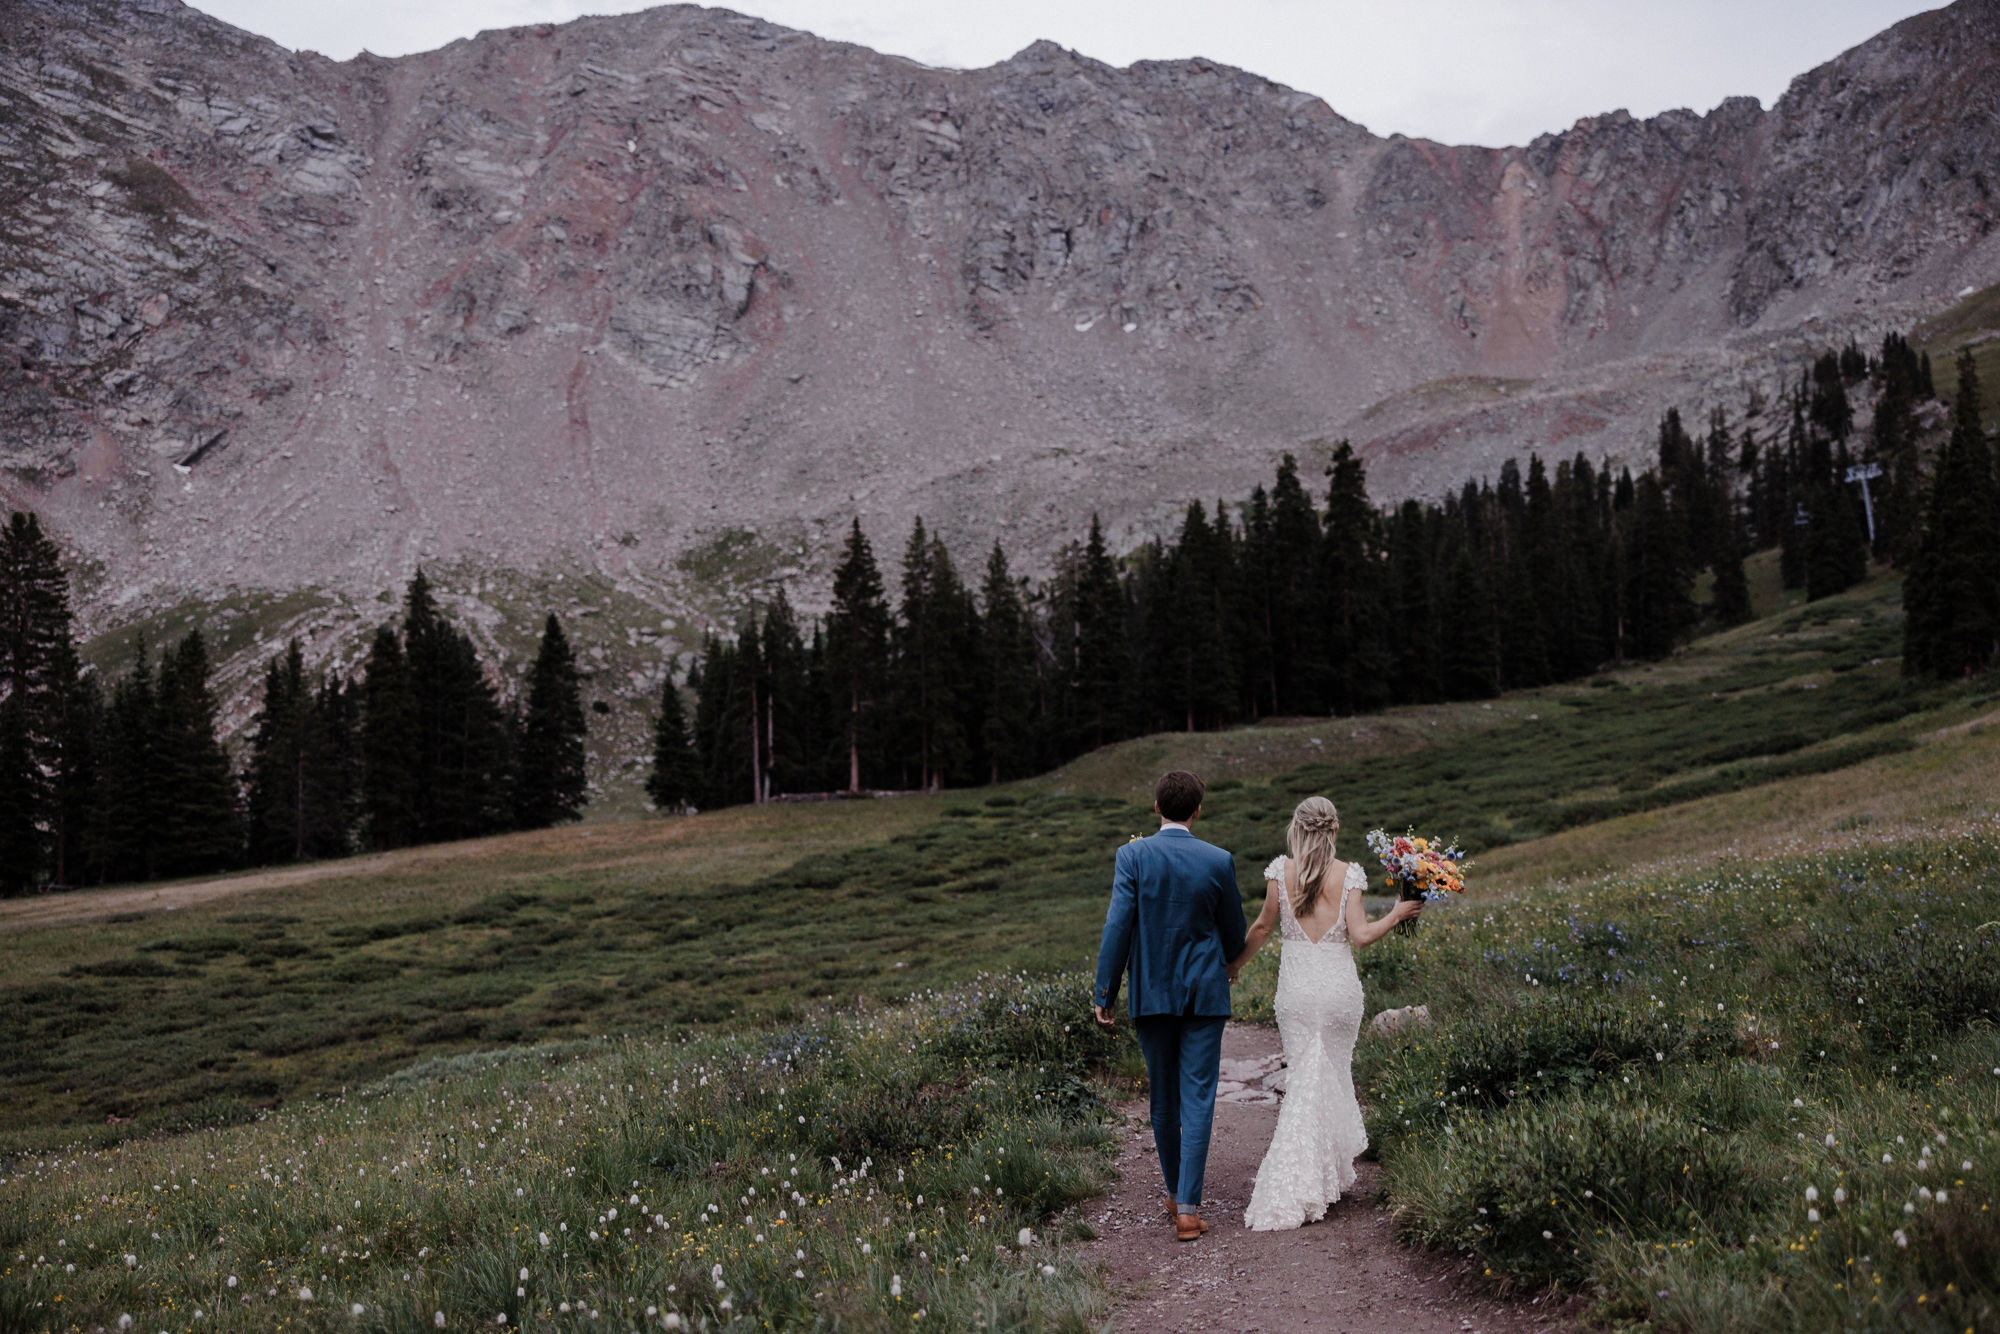 after knowing what questions to ask wedding vendors, bride and groom take wedding photos in the colorado mountains